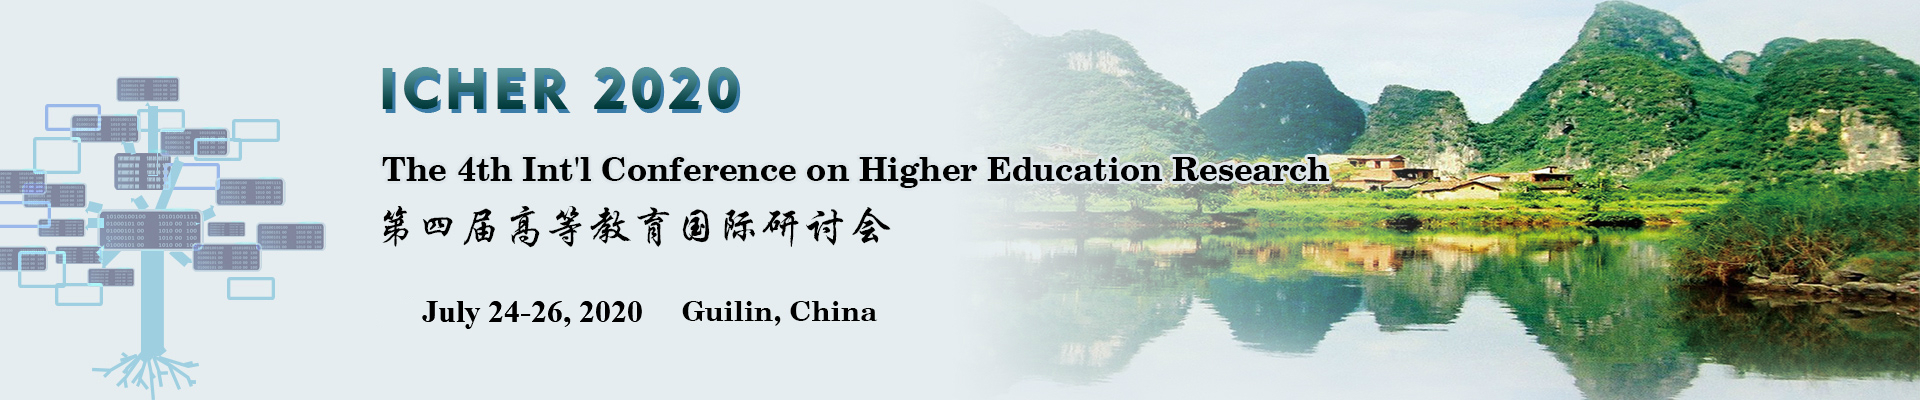 The 4th Int'l Conference on Higher Education Research (ICHER 2020), Guilin, Guangxi, China